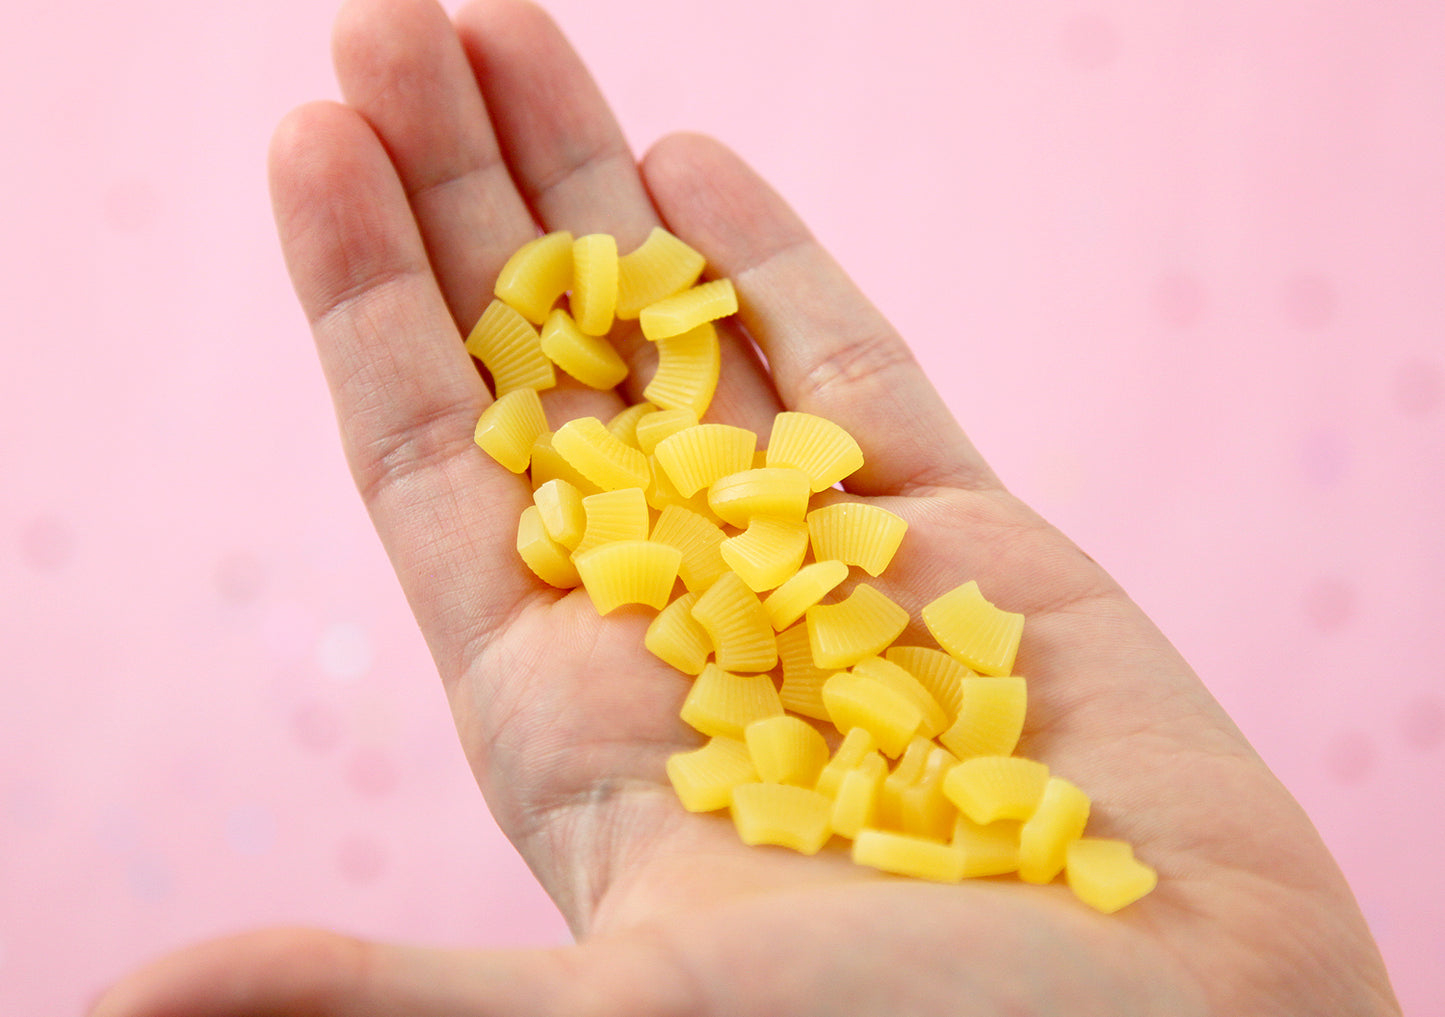 Fake Pineapple Slices - 12mm Tiny Fake Pineapple Slices Soft Squishy Silicone Fruit or Resin Cabochons - 14 pc set